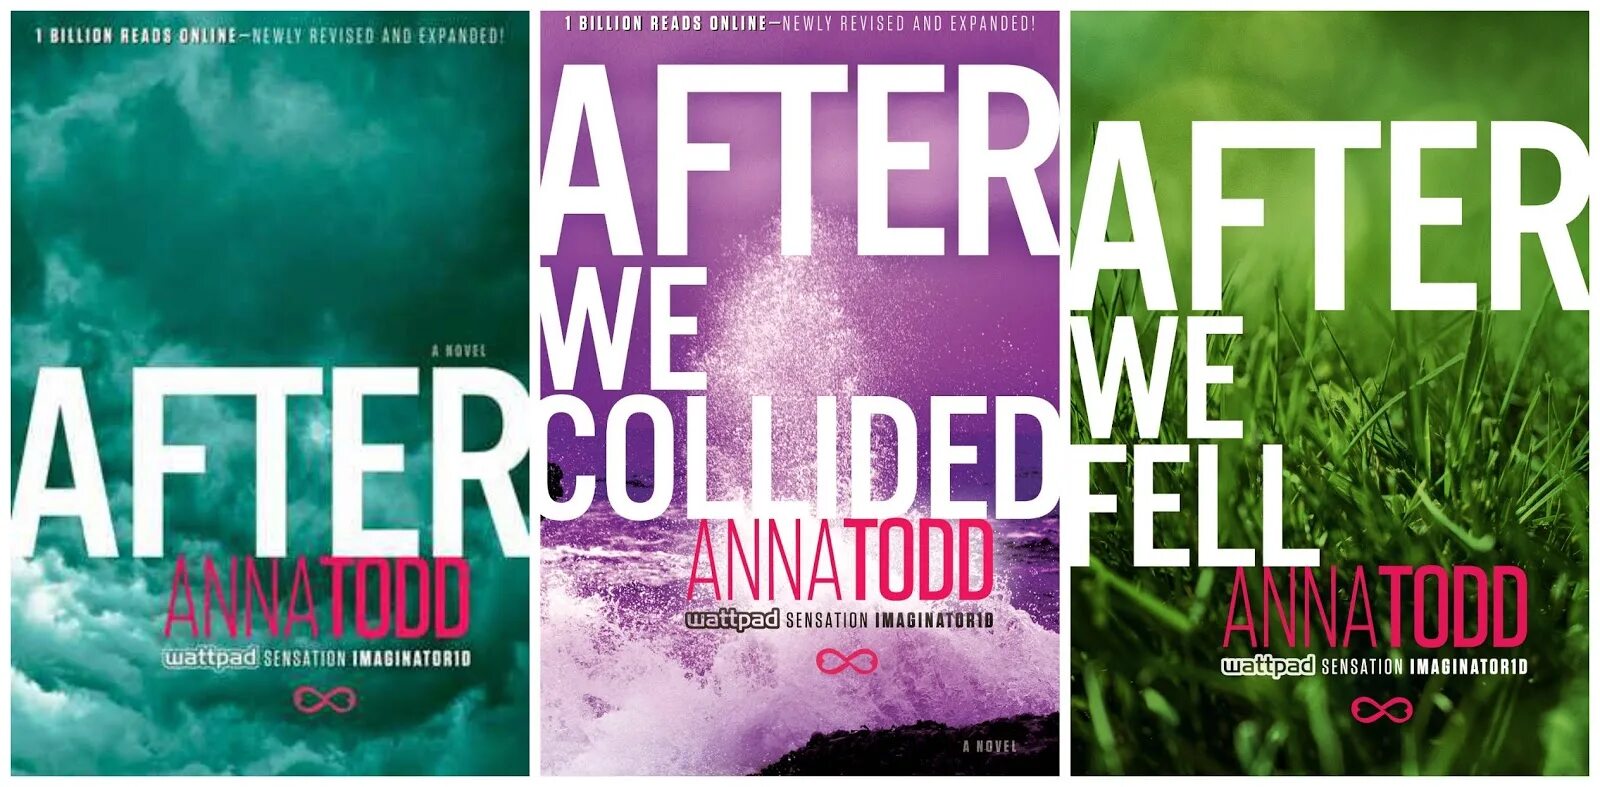 Todd Anna "after". Книга after. After book Anna Todd. After we Collided book.